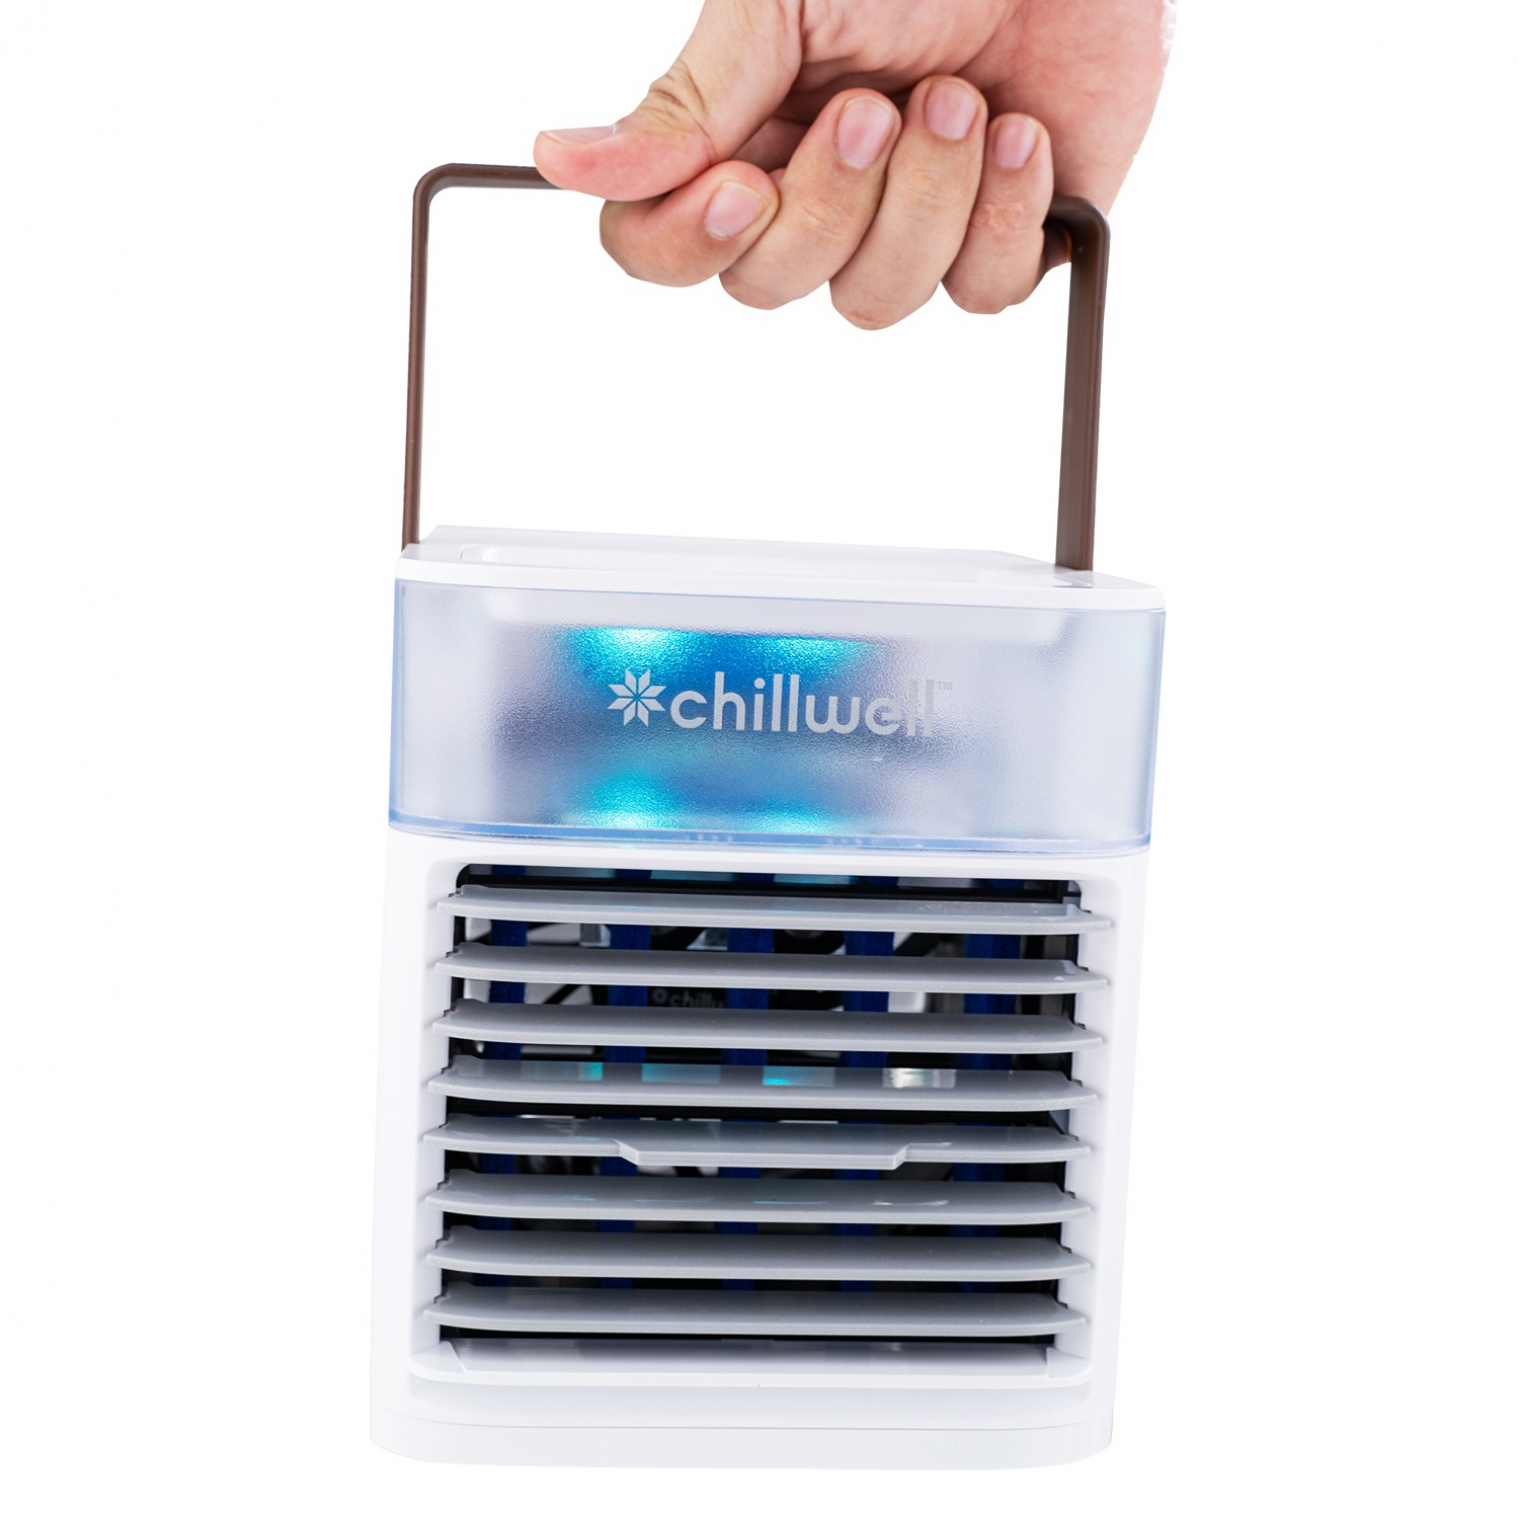 Chillwell Ac Personal Air Cooler Reviews